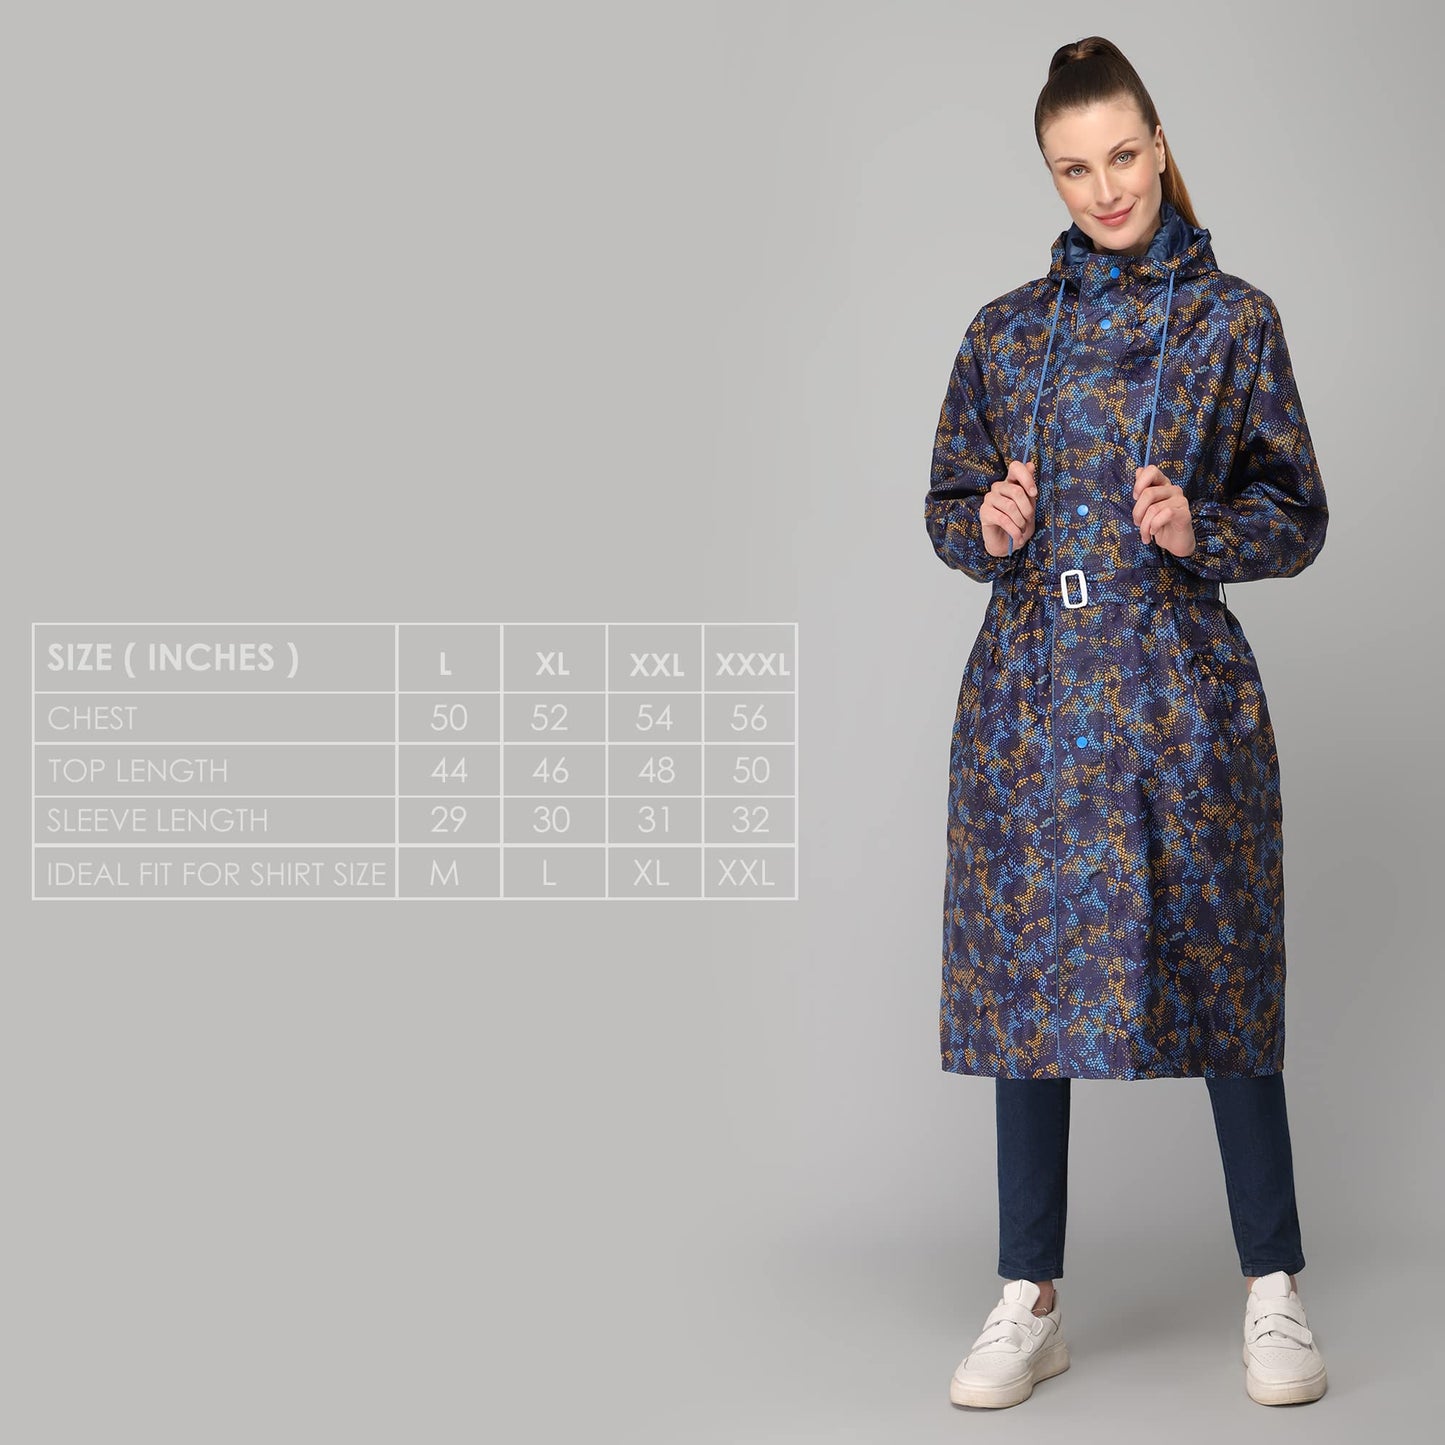 THE CLOWNFISH Juliet Series Raincoats for Women Rain Coat for Women Raincoat for Ladies Waterproof Reversible Double Layer Longcoat with Printed Plastic Pouch (Blue, Large)